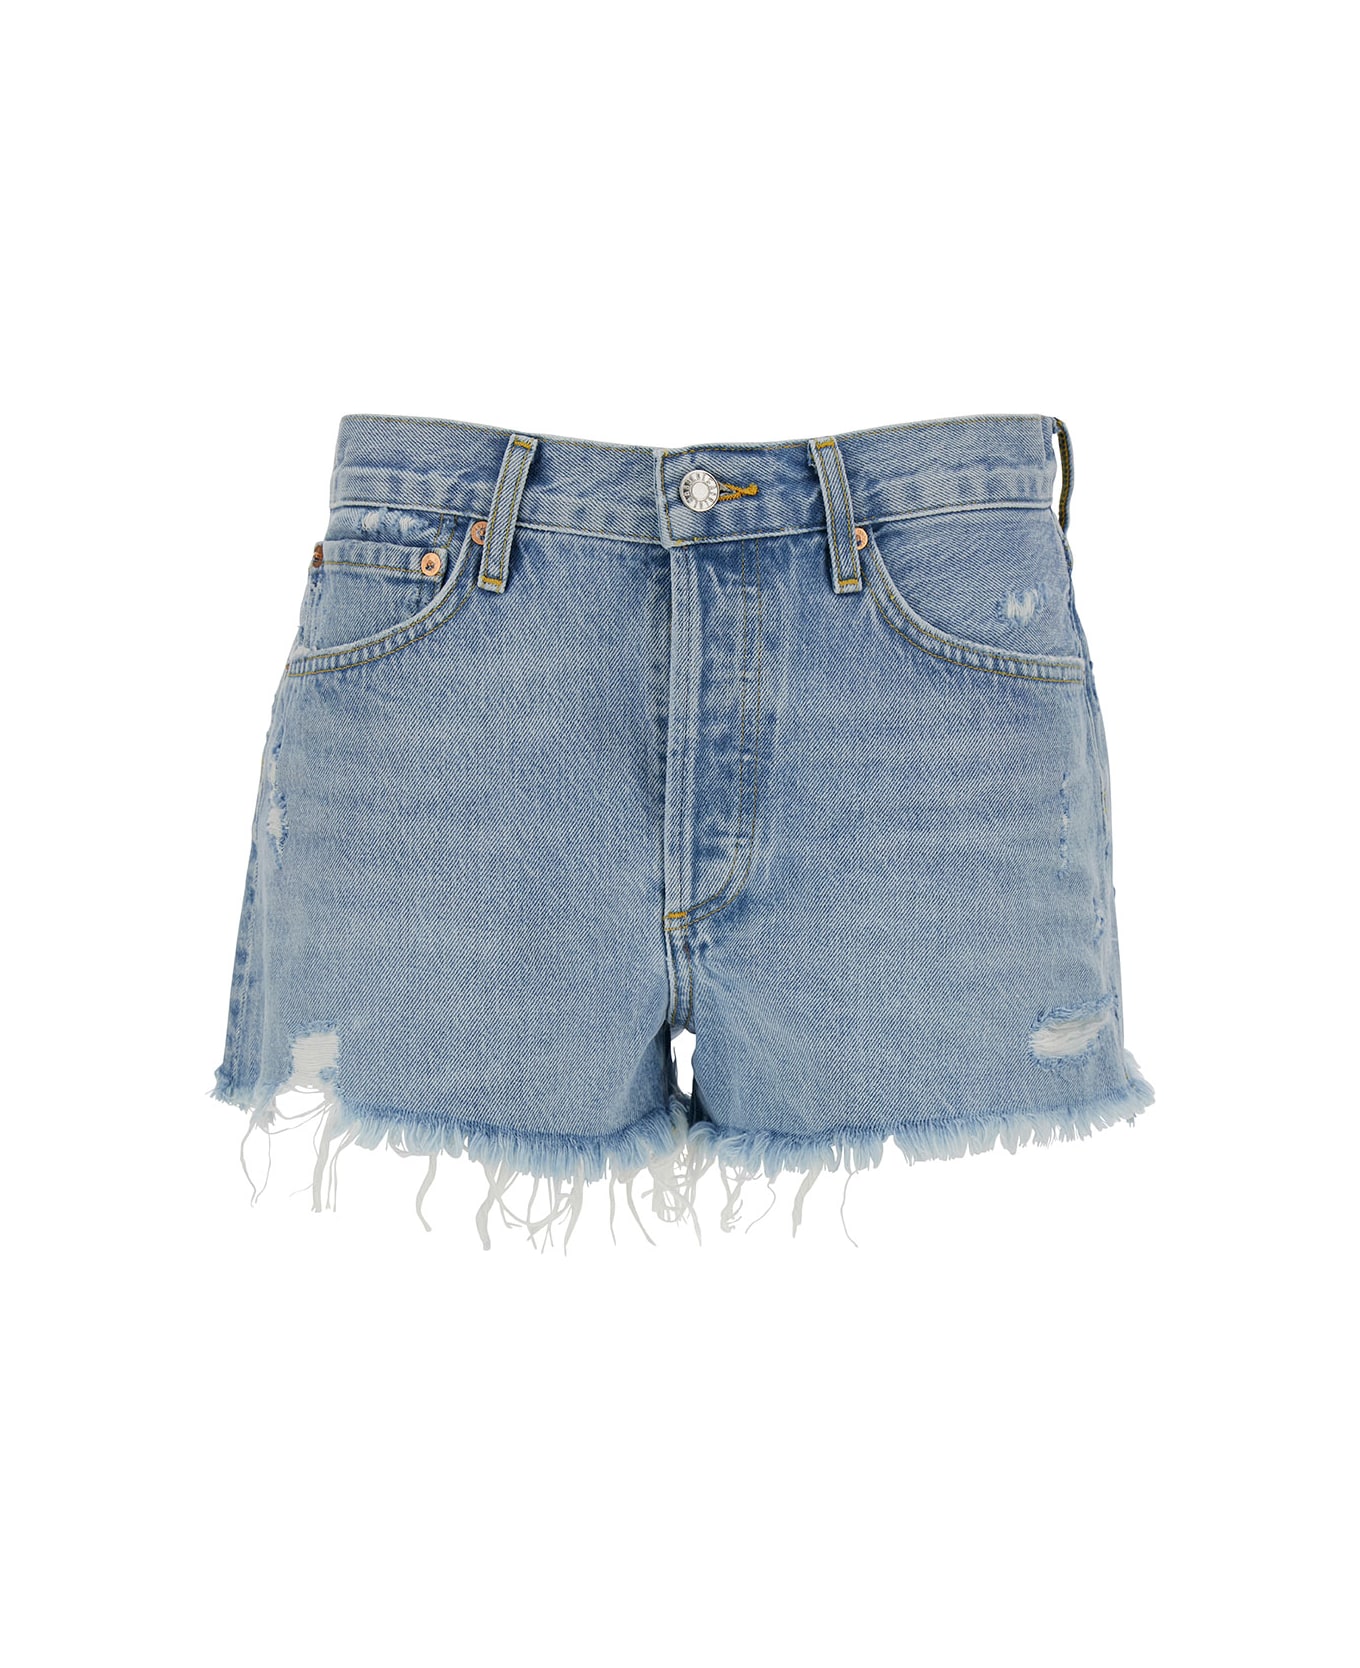 AGOLDE 'parker' Light Blue Shorts With Rips And Raw-edged Hem In Cotton Denim Woman - Blu